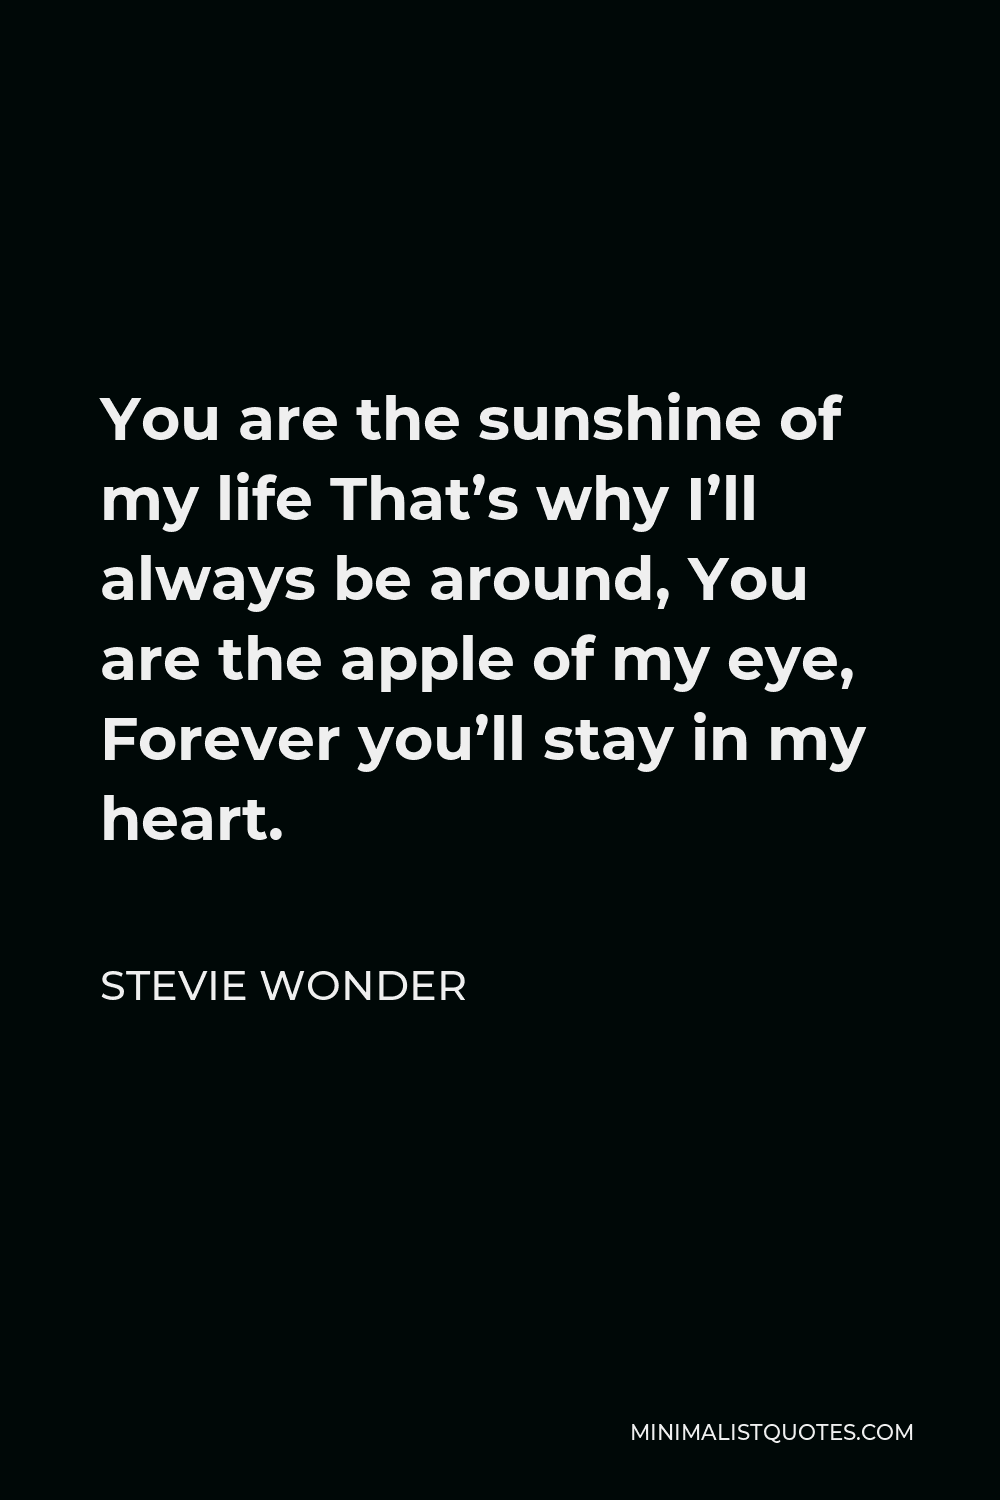 Stevie Wonder Quote - You are the sunshine of my life That’s why I’ll always be around, You are the apple of my eye, Forever you’ll stay in my heart.